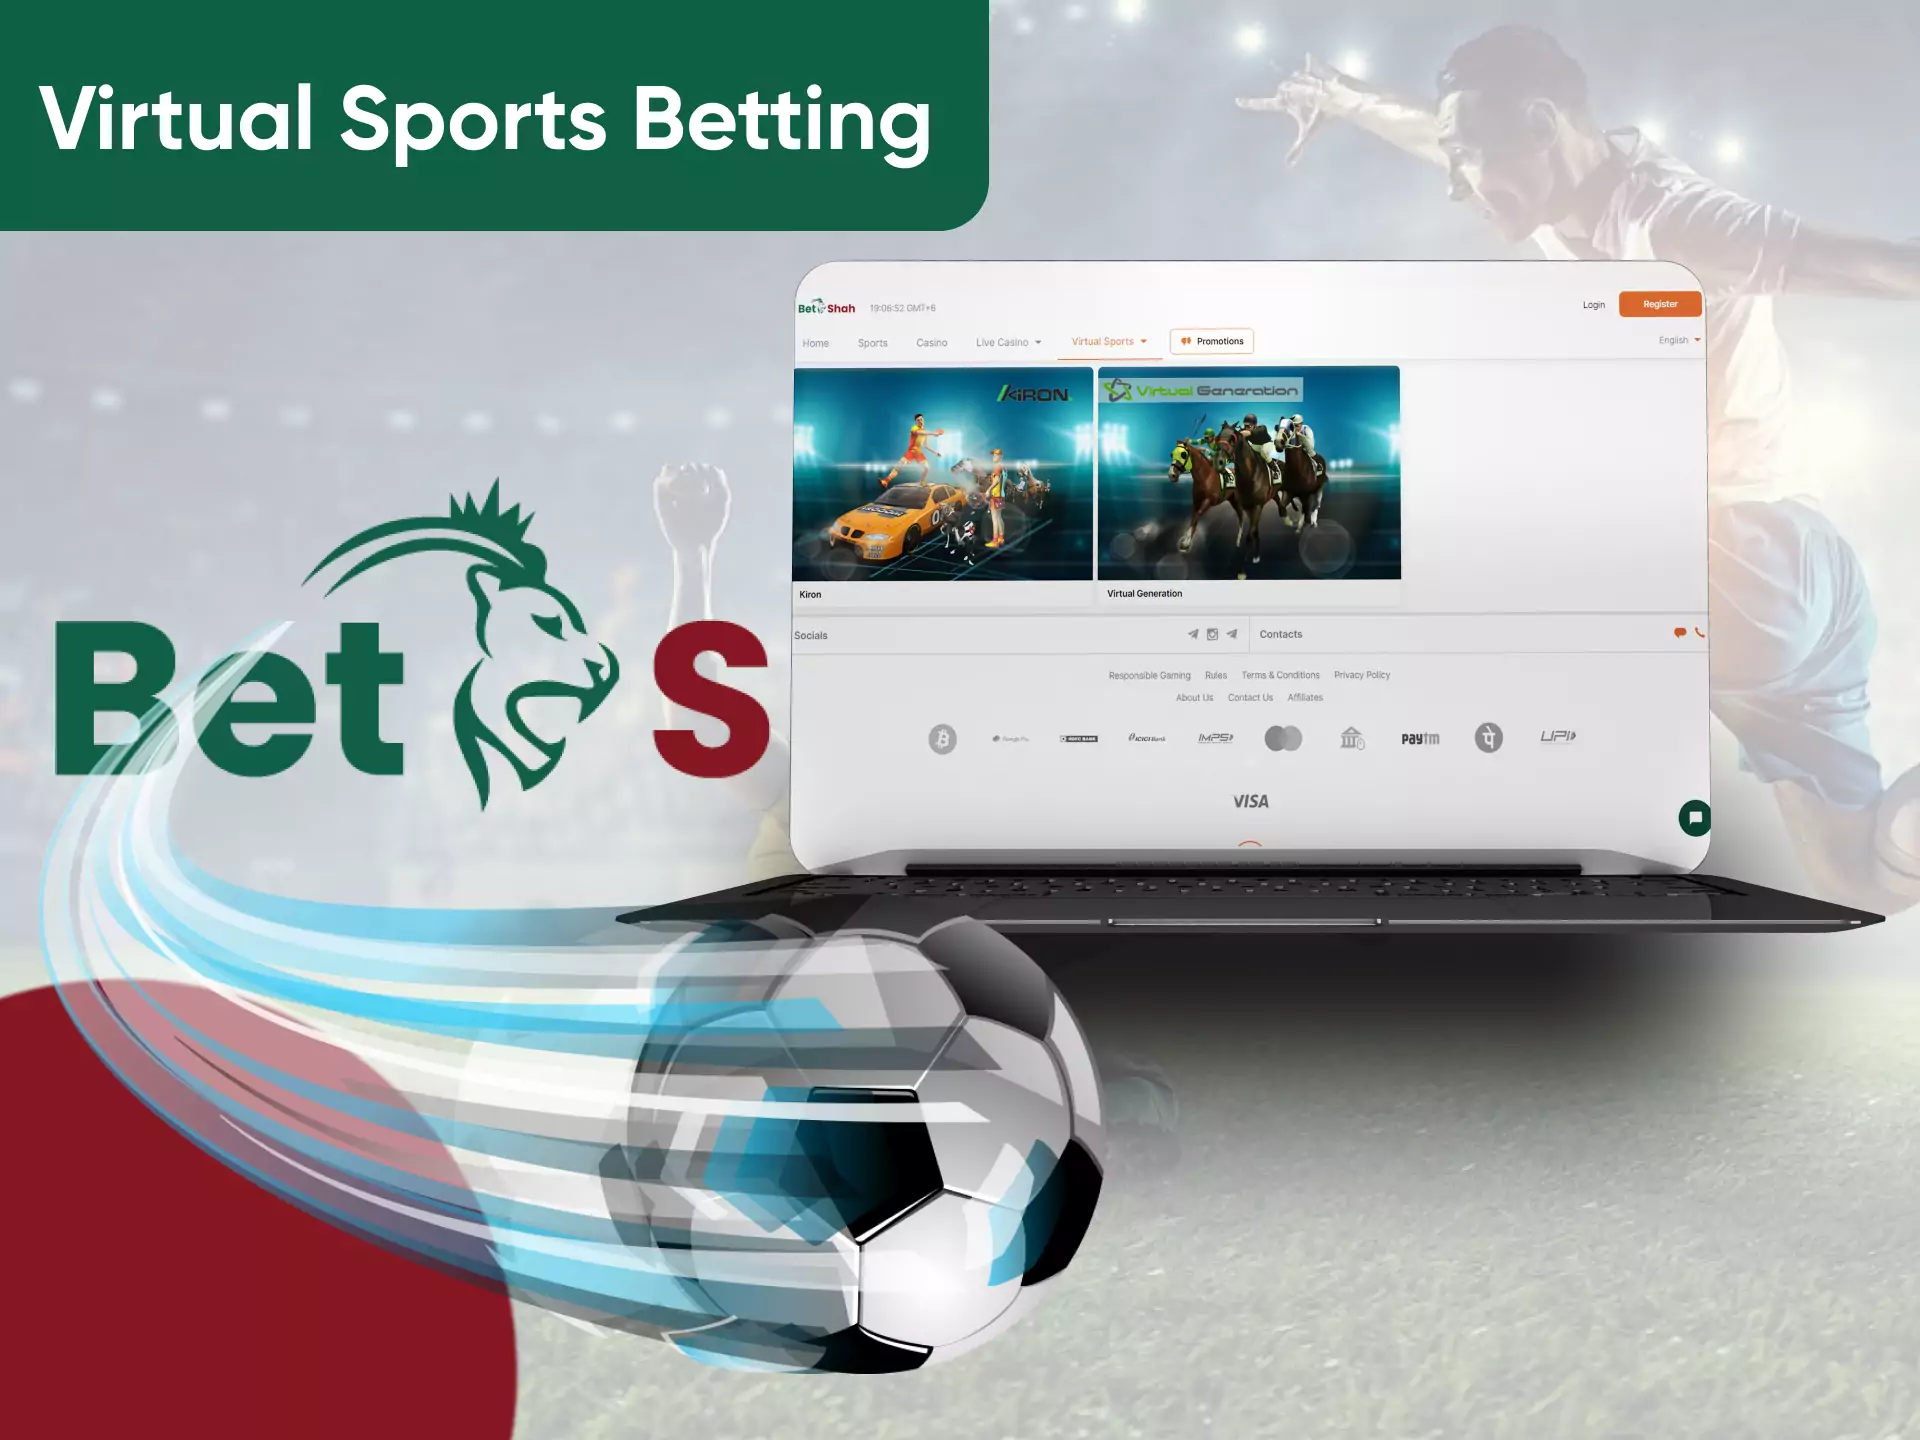 Besides traditional betting, there is virtual sports betting available on Beshah as well.